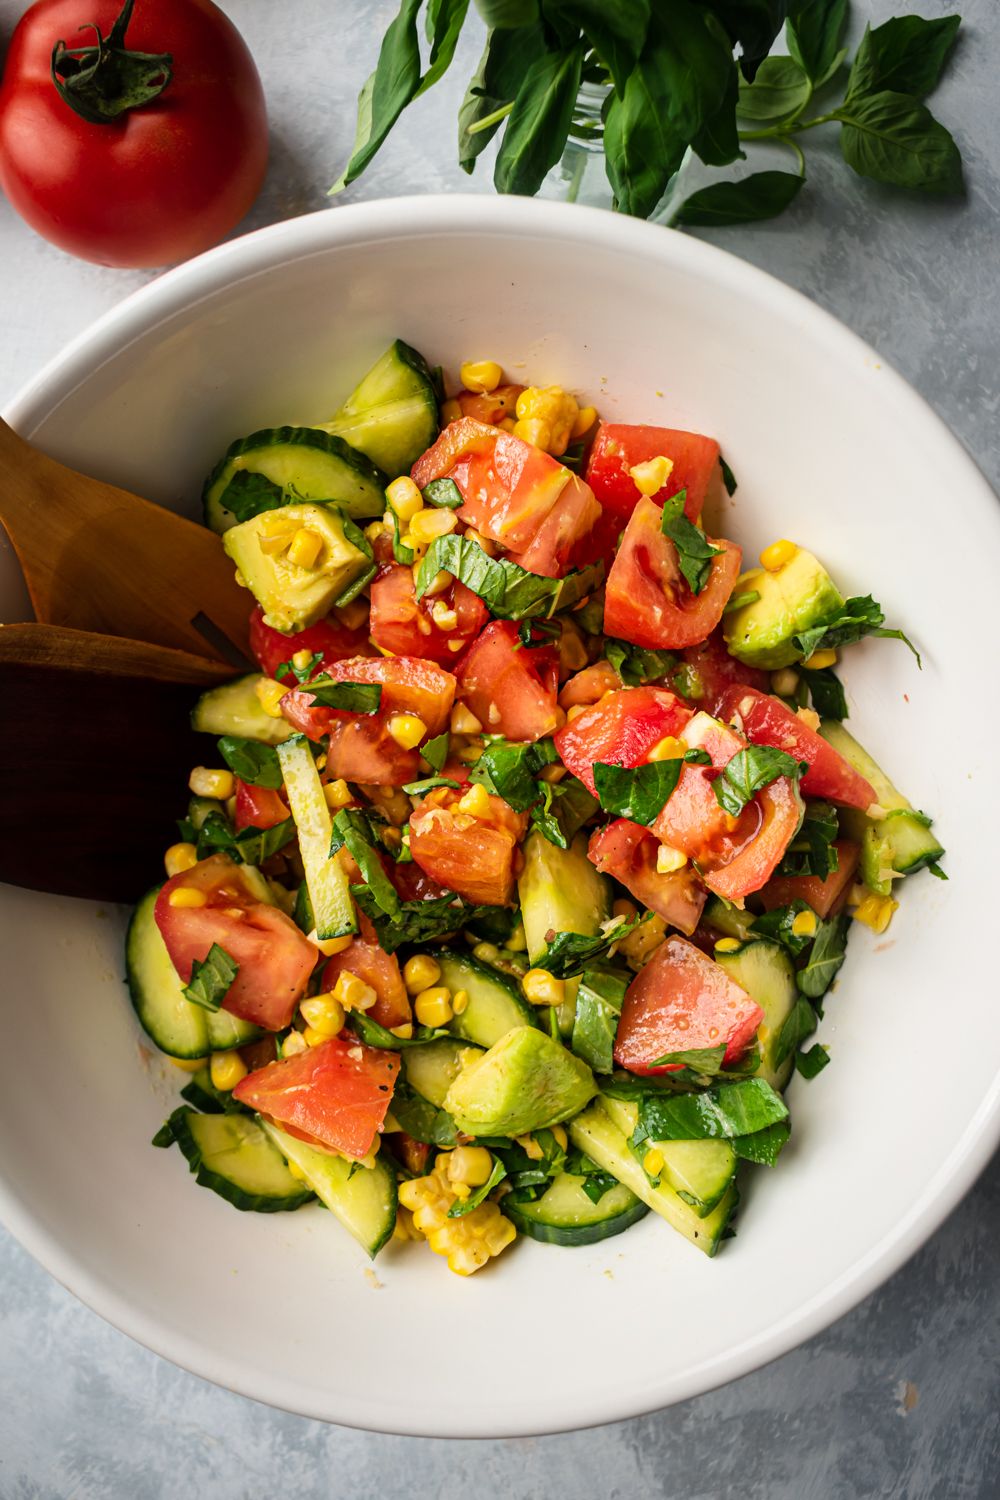 Cucumber tomato salad with chopped tomatoes, corn, avocado, corn, and basil in a bowl with wooden tongs.